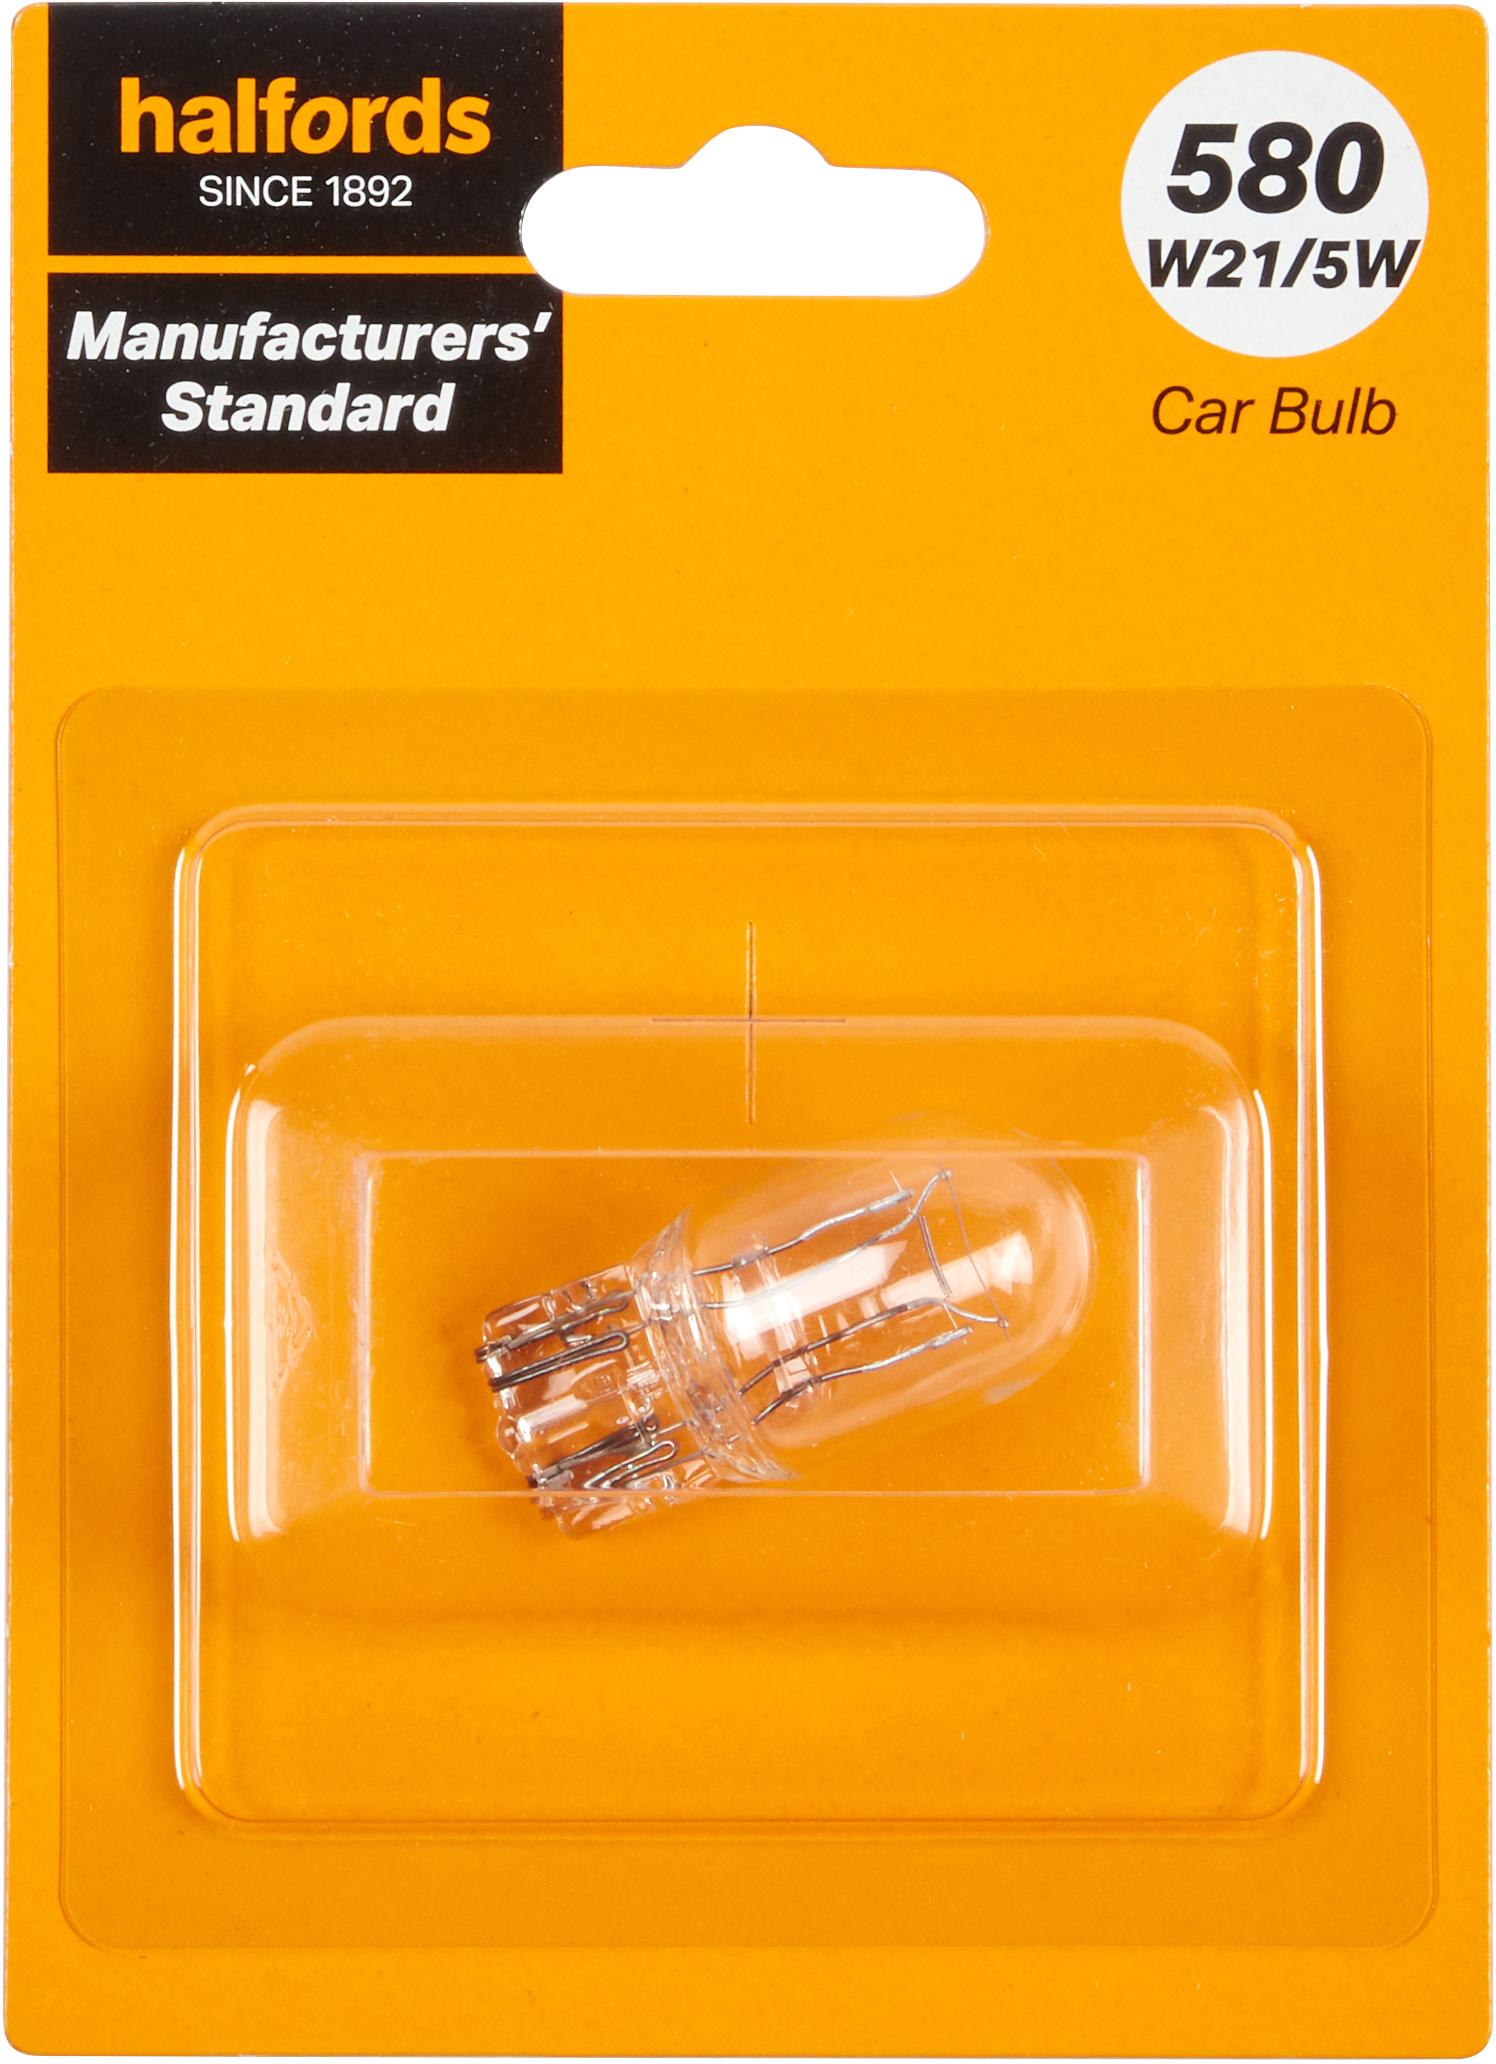 580 W21/5W Car Bulb Manufacturers Standard Halfords Single Pack